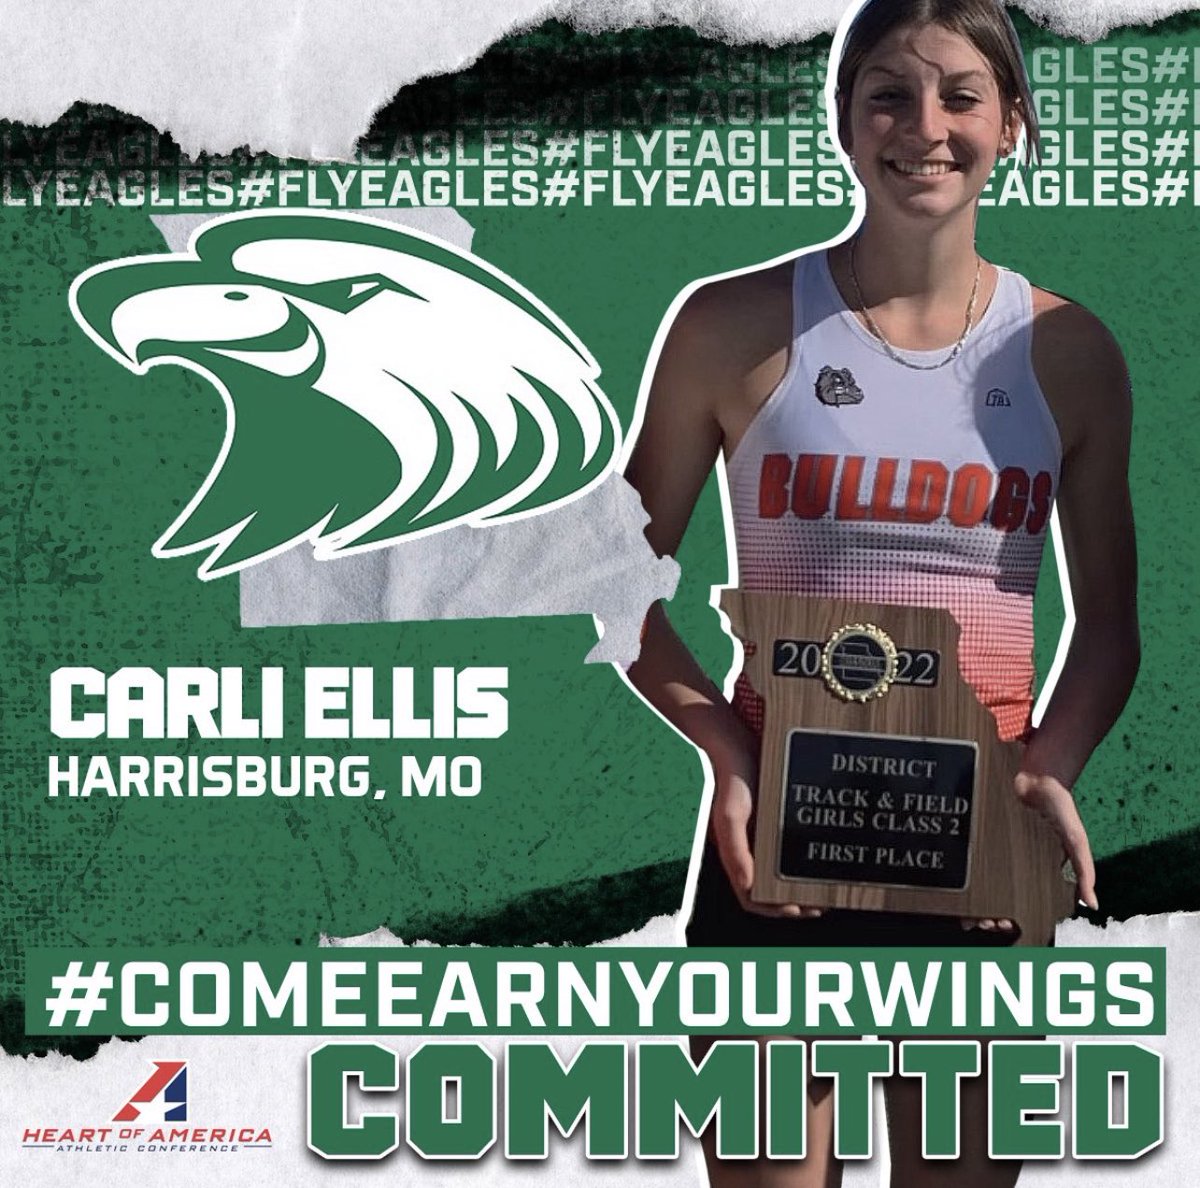 Ladies and Gentlemen, please welcome Ms. Carli Ellis to the Eagle Family. Missouri HS State Finalist in the High Jump Carli Ellis Harrisburg HS #comeearnyourwings